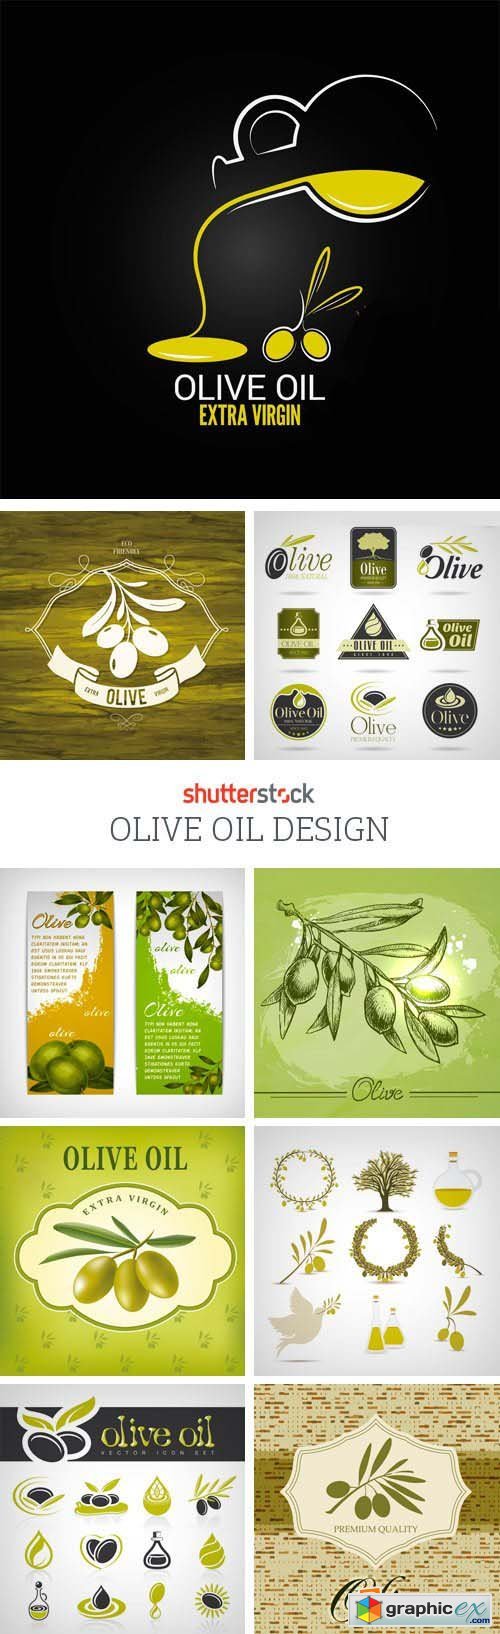 Amazing SS - Olive Oil Design, 25xEPS